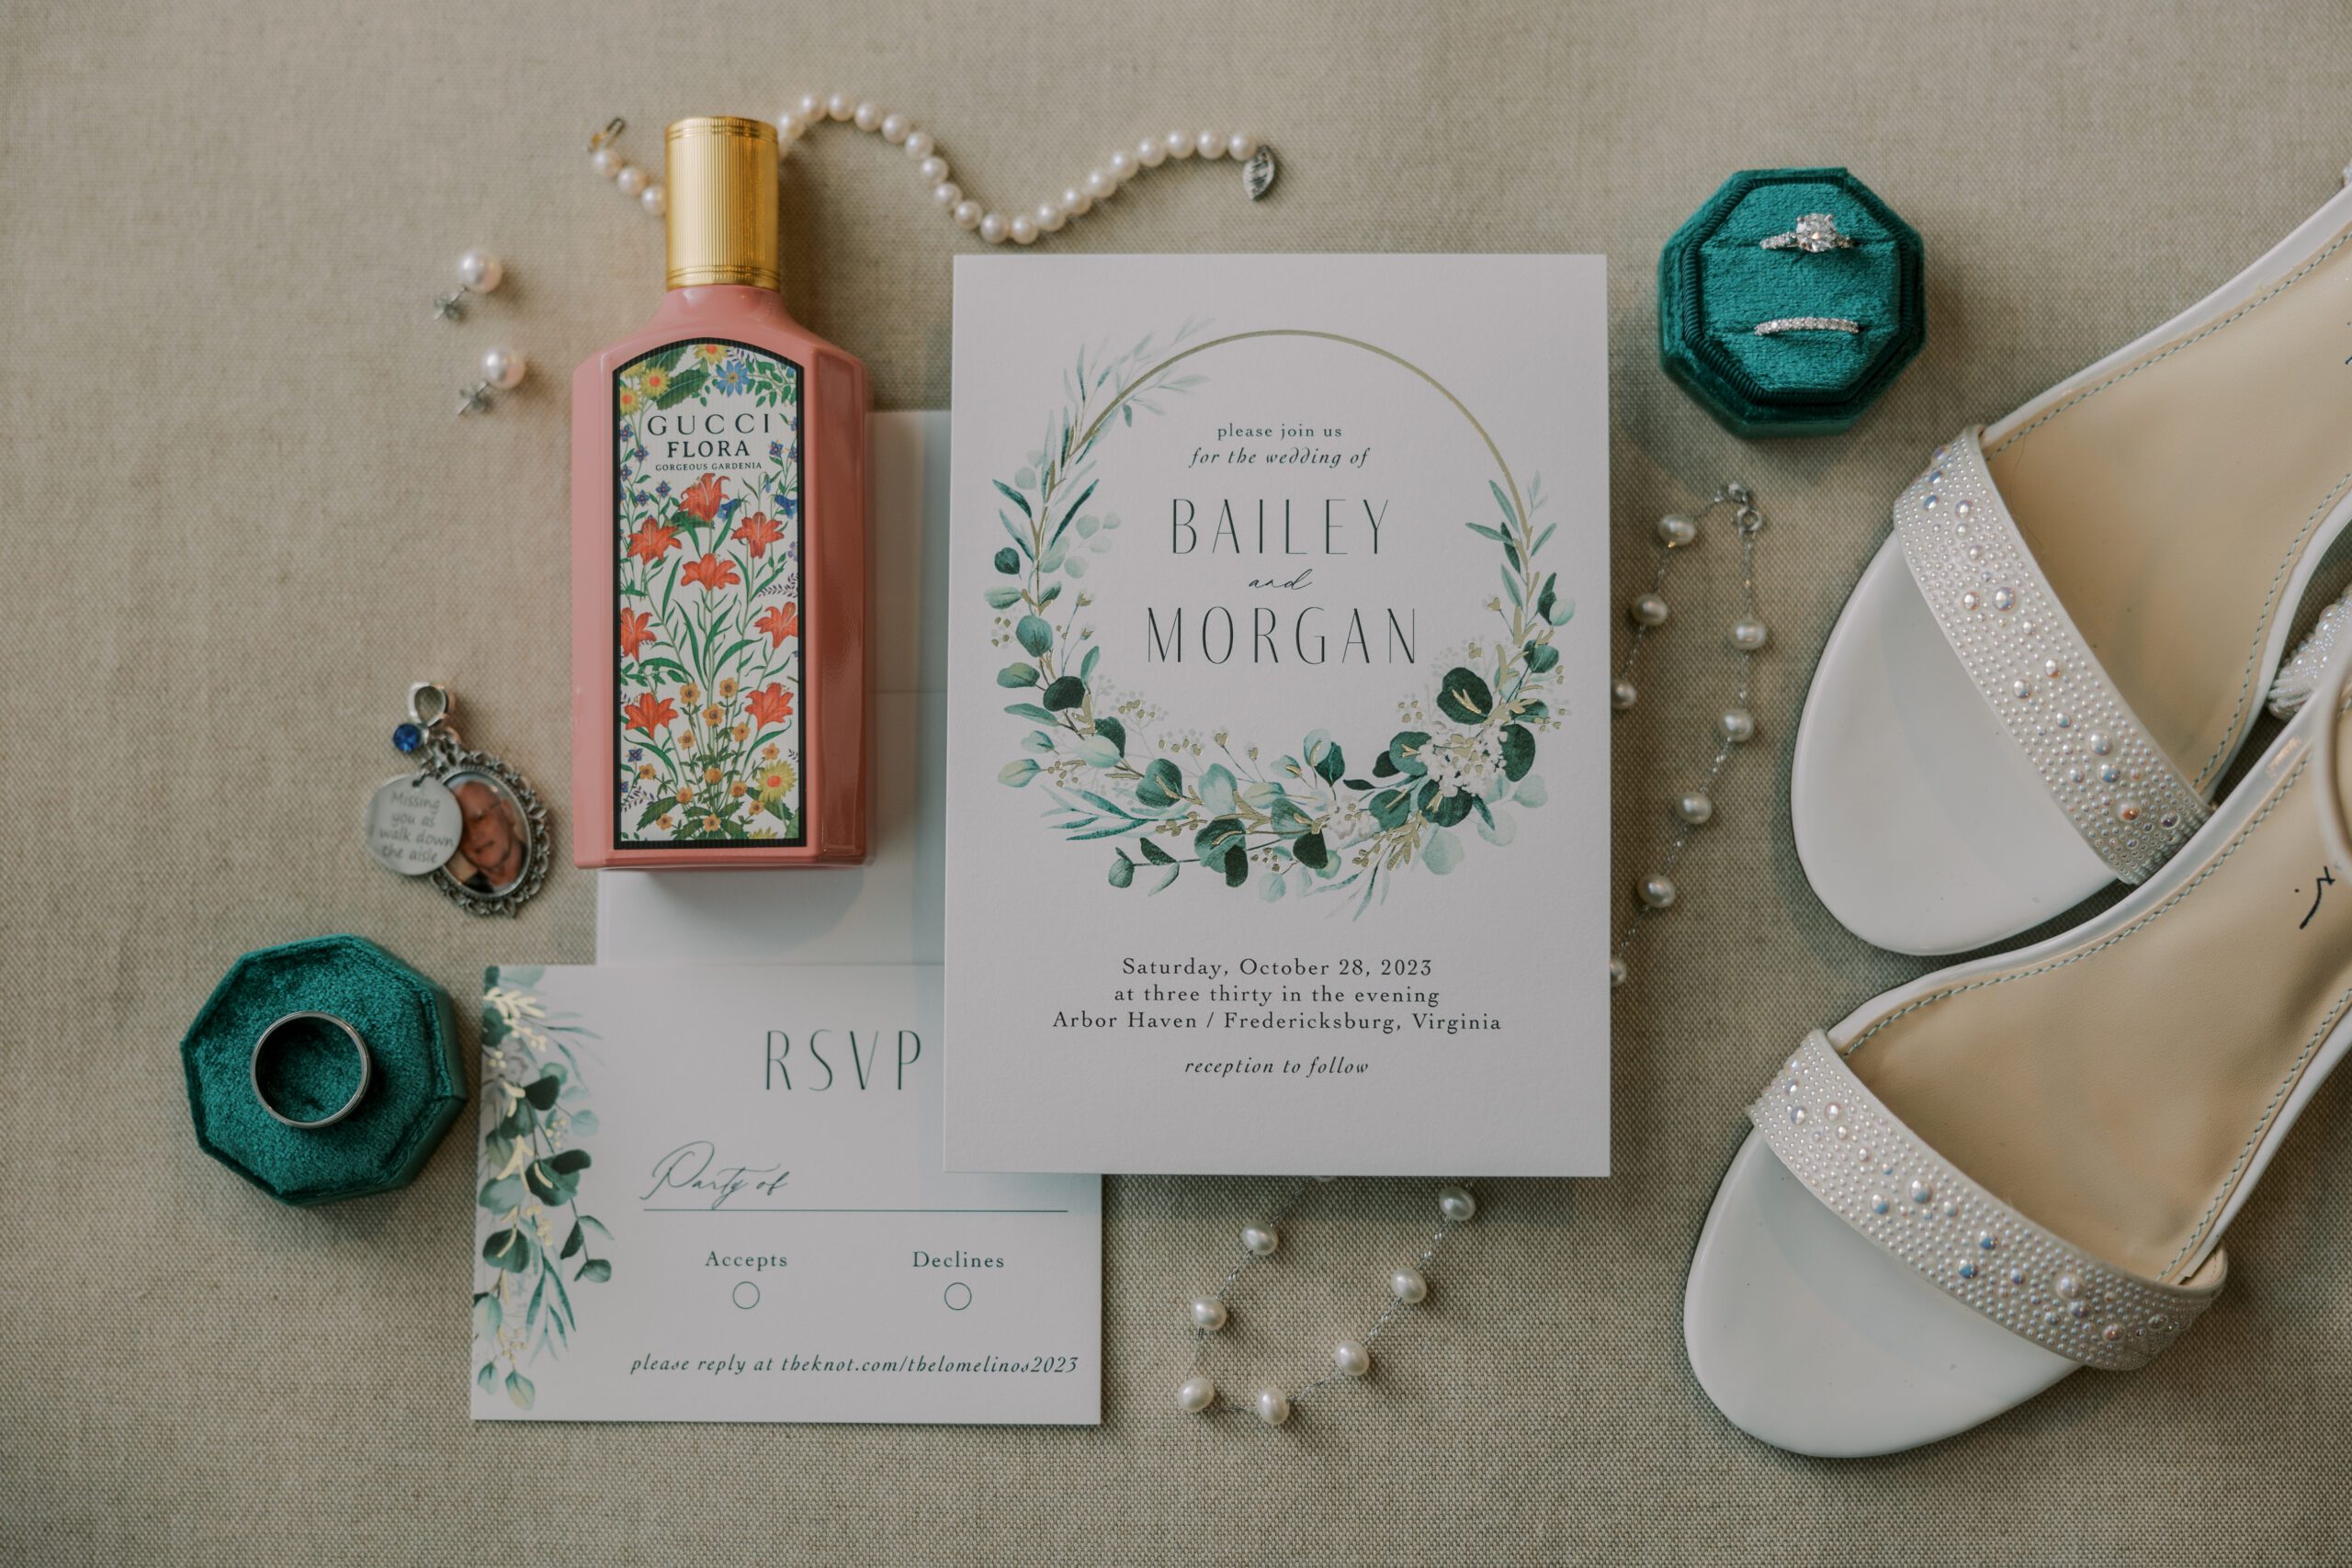 Detail photo of white wedding invitation with a gold circle and greenery on it, rsvp card, rings, bride's jewelry, shoes, bouquet charm, and perfume also pictured